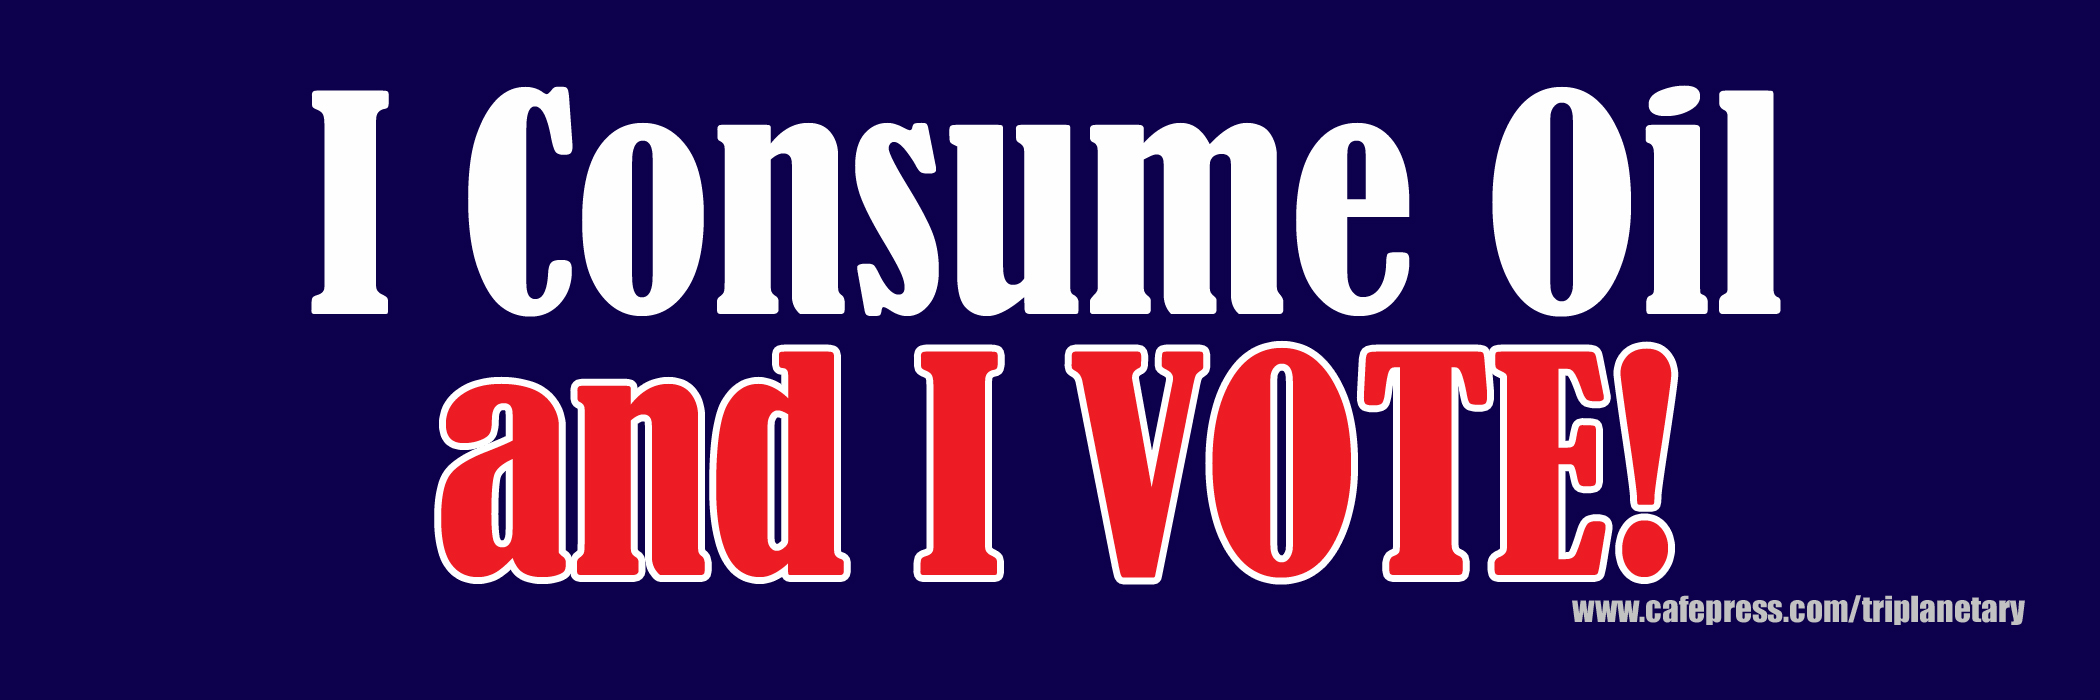 Red, white, and blue image of bumper sticker: 'I Consume Oil and I VOTE!'